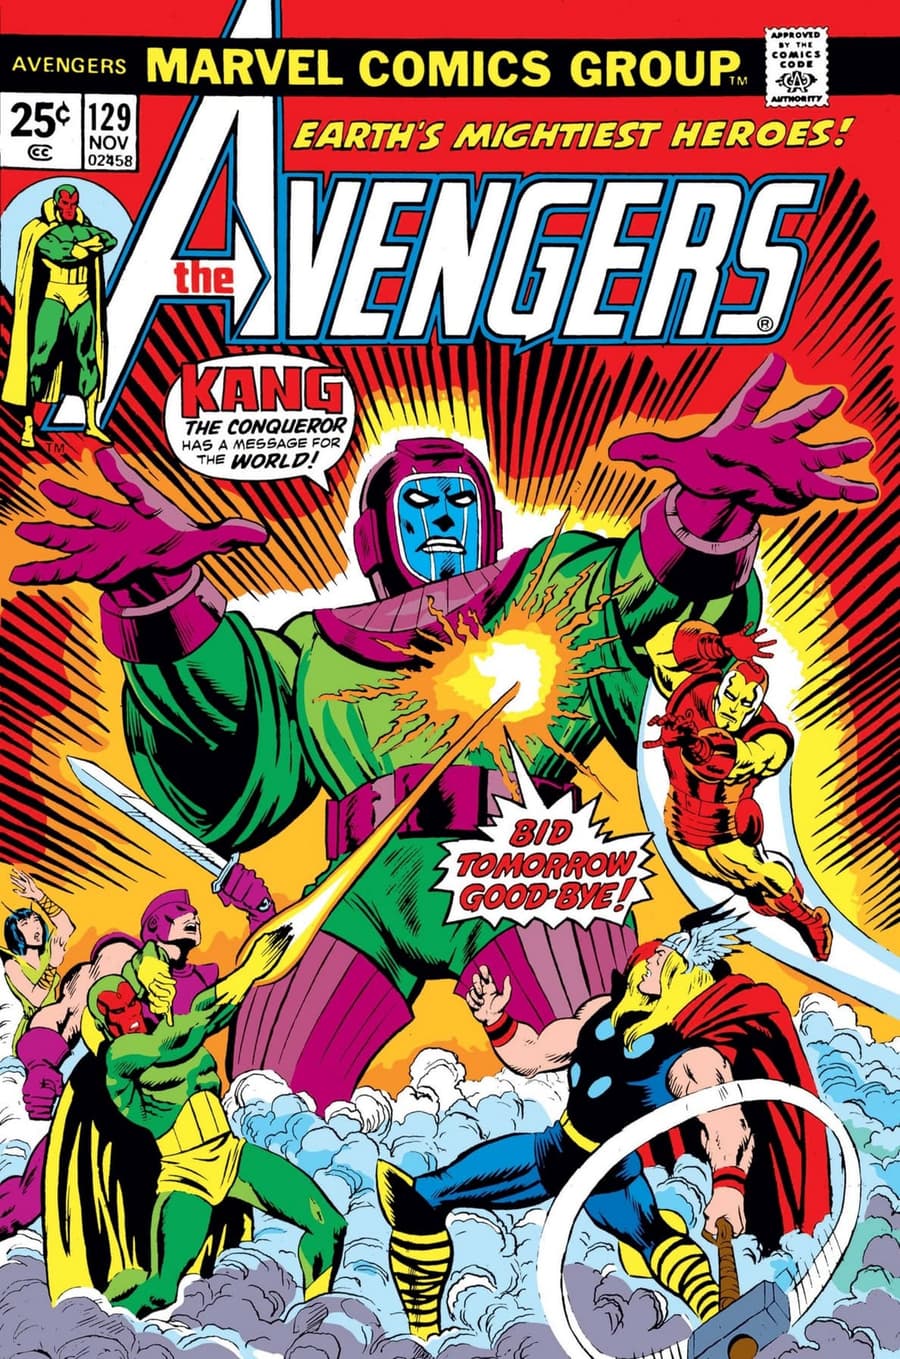 AVENGERS (1963) #129 cover by Ron Wilson